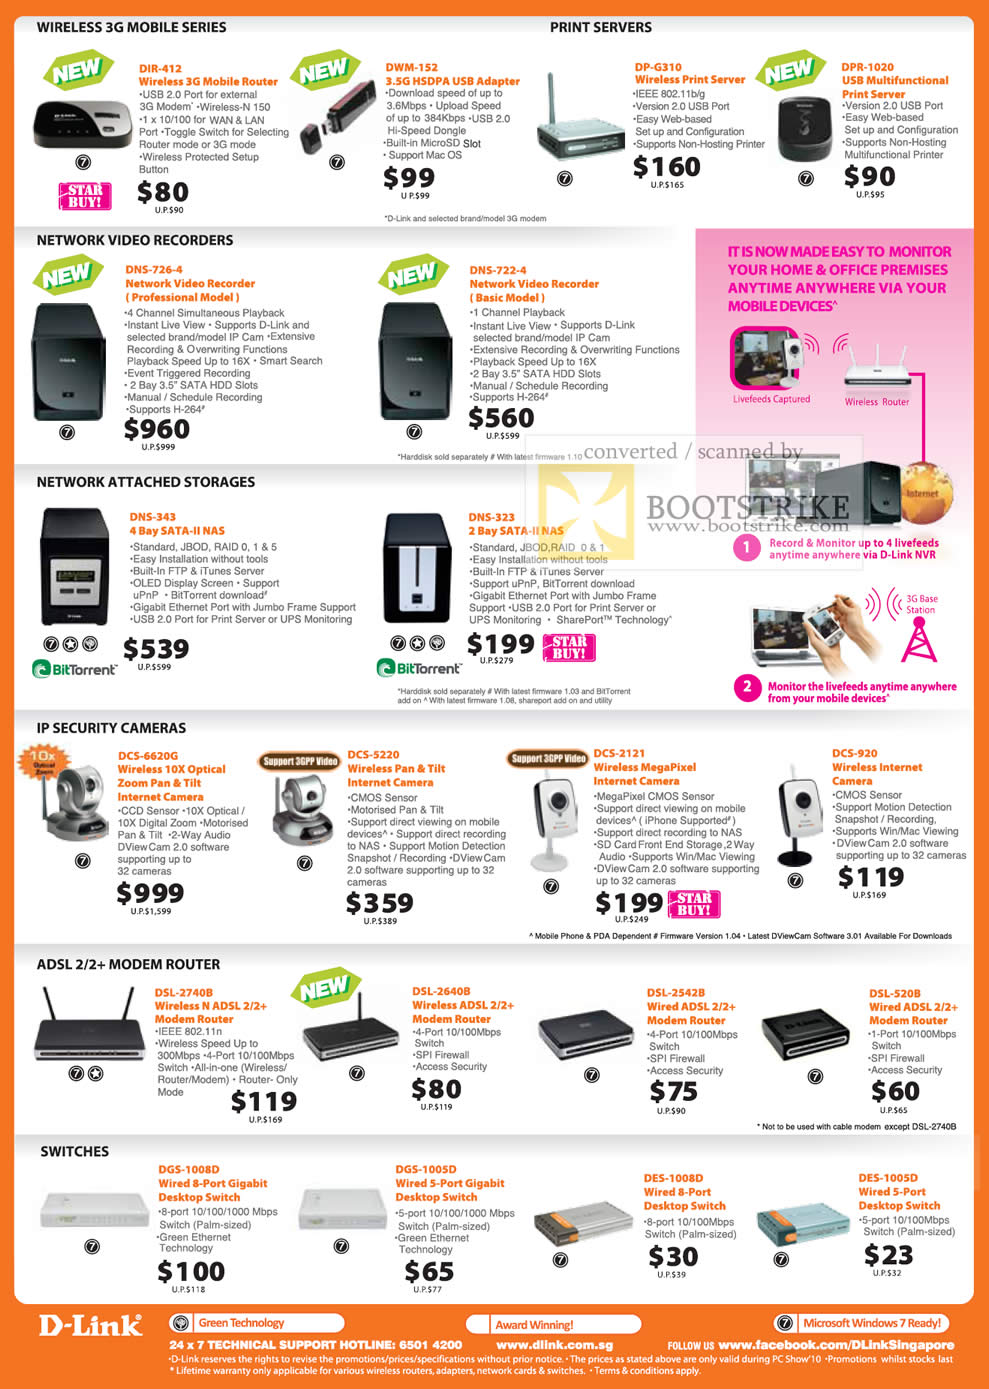 PC Show 2010 price list image brochure of Dlink Wireless 3G Mobile USB Network Video Recorders NAS IP Security Cameras ADSL Modem Routers Print Servers